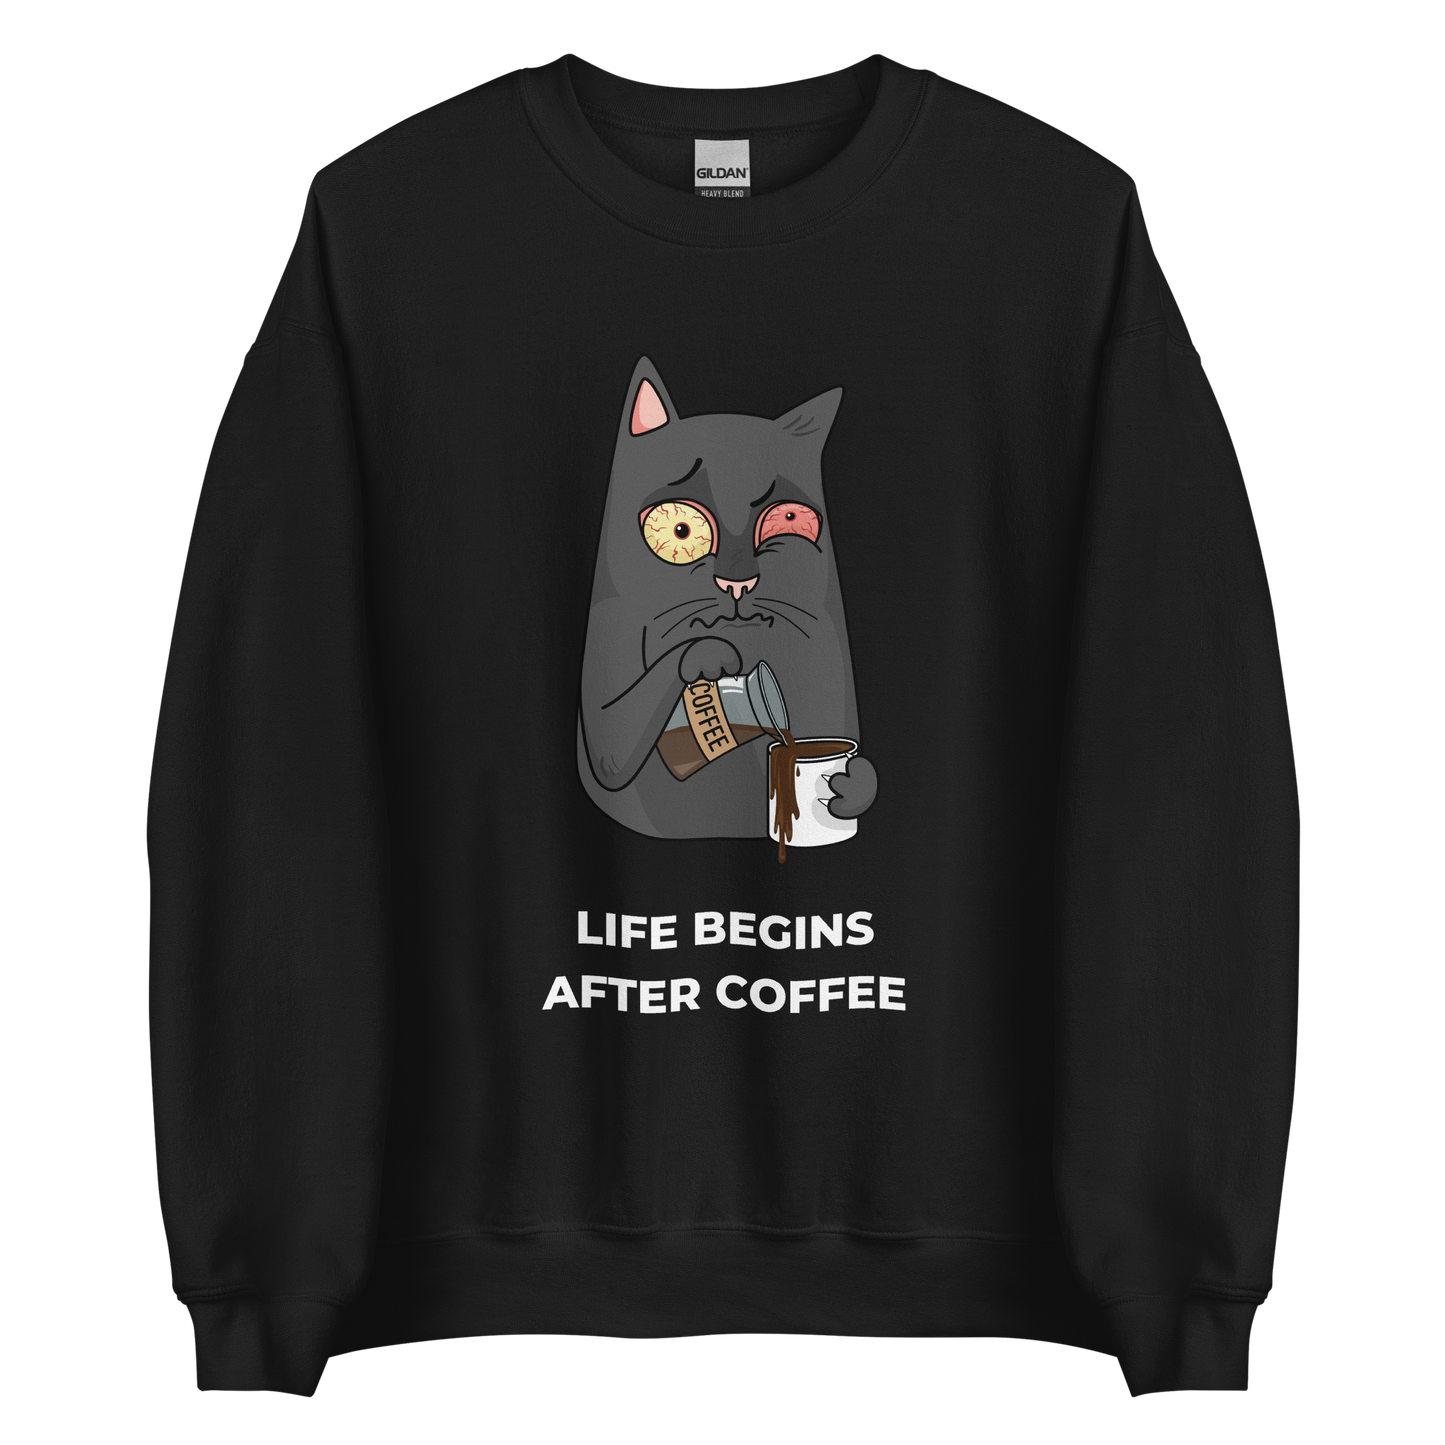 Black Cat Sweatshirt featuring a hilarious Life Begins After Coffee graphic on the chest - Funny Graphic Cat Sweatshirts - Boozy Fox